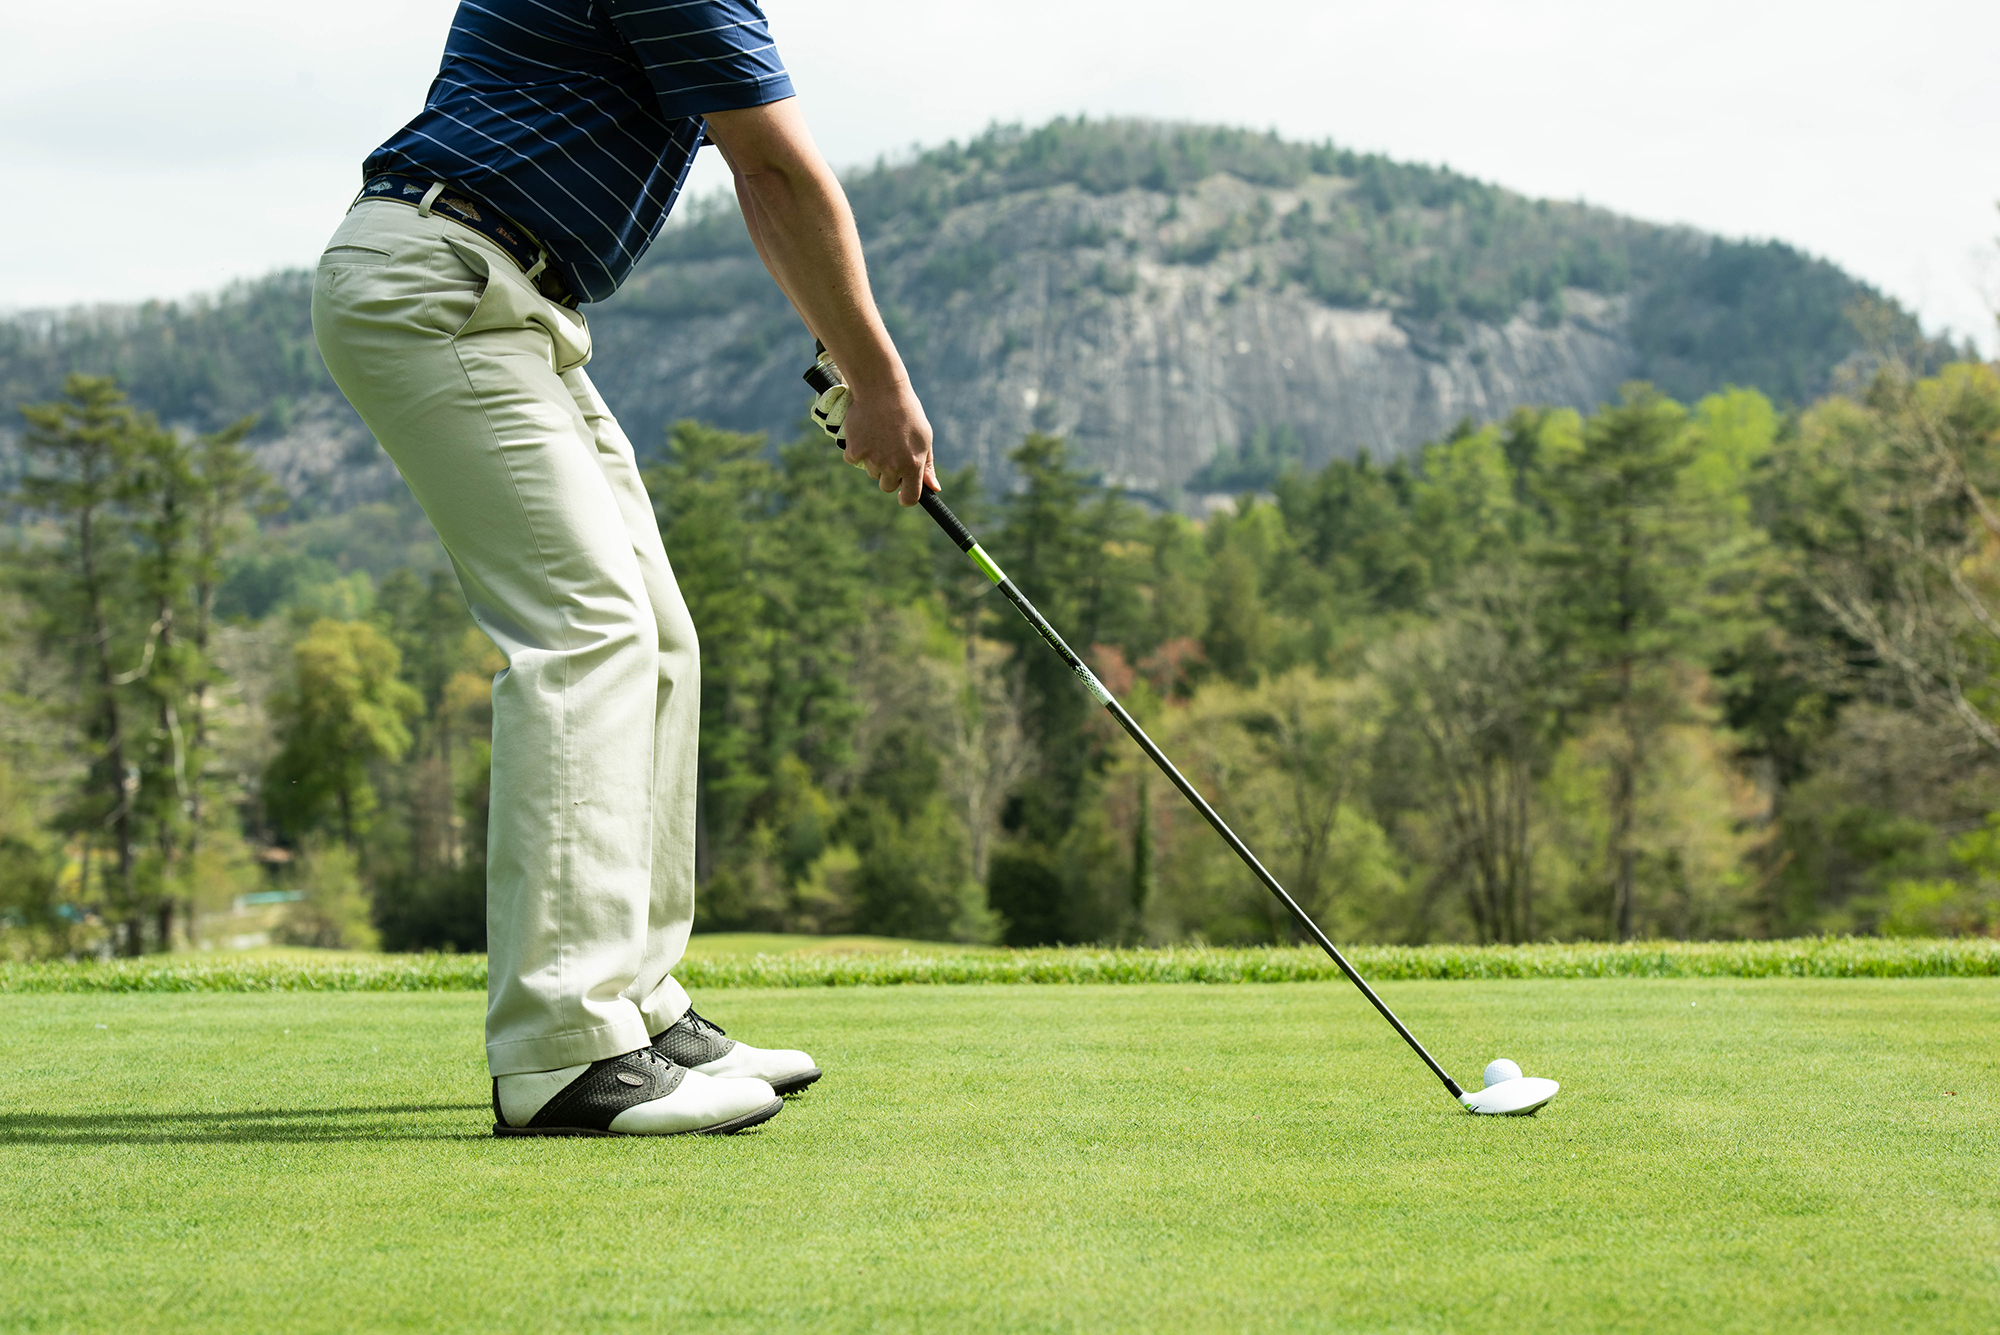 Great Escapes 5 golf getaways for fall fun on the fairways